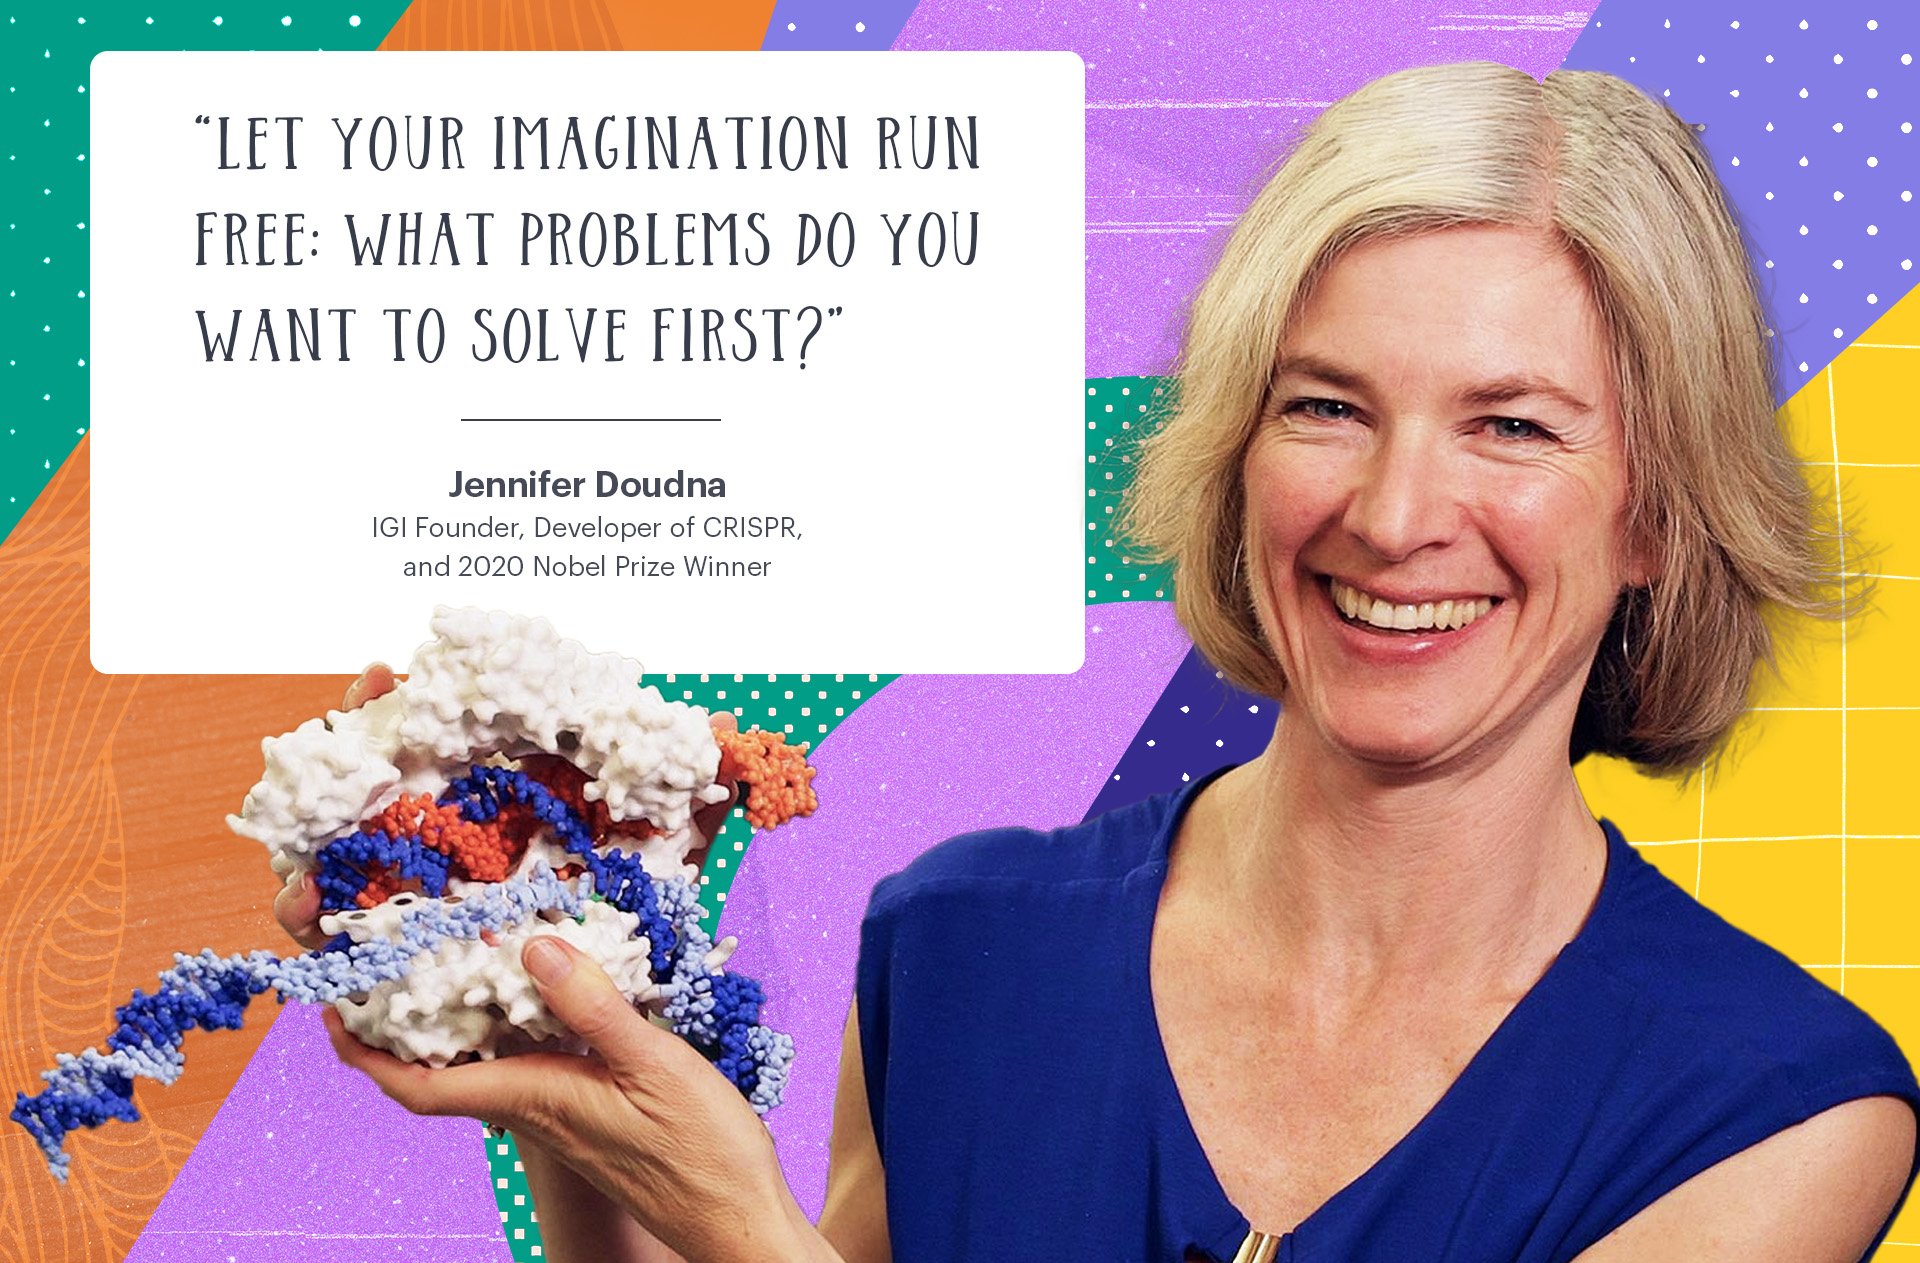 Image of Jennifer Doudna with a quote